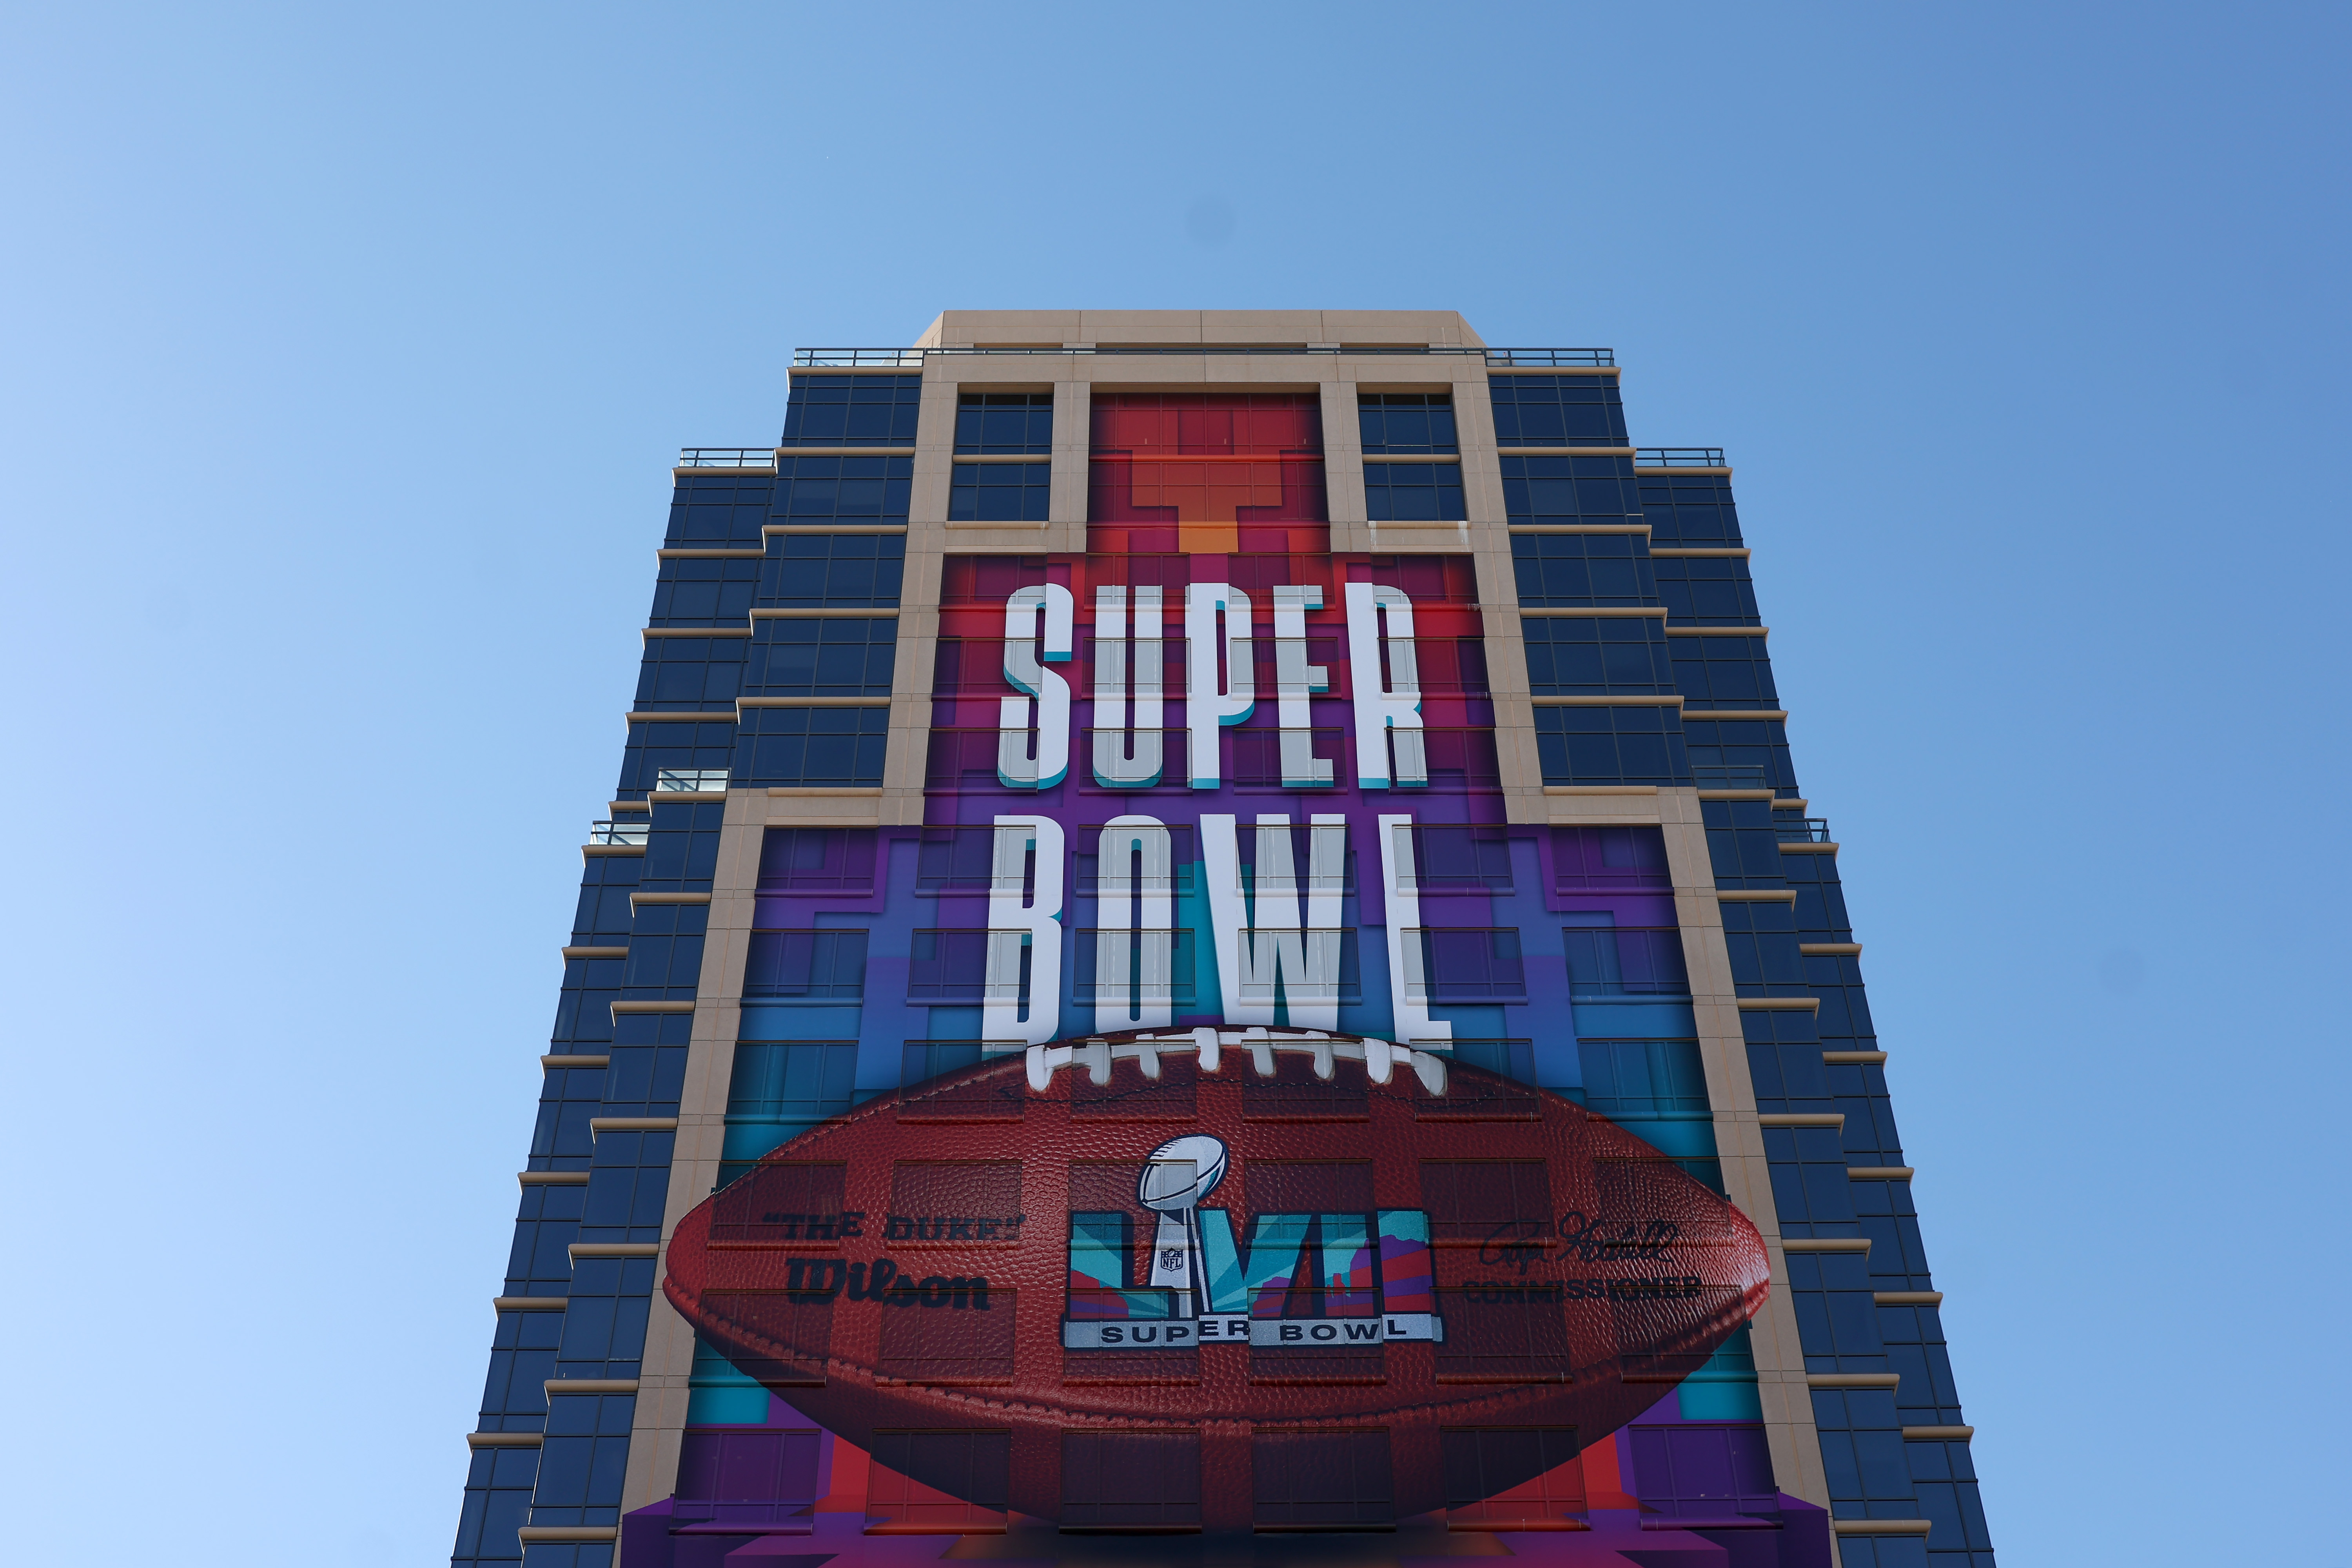 Would love to play there': Super Bowl champs' plans for Australia